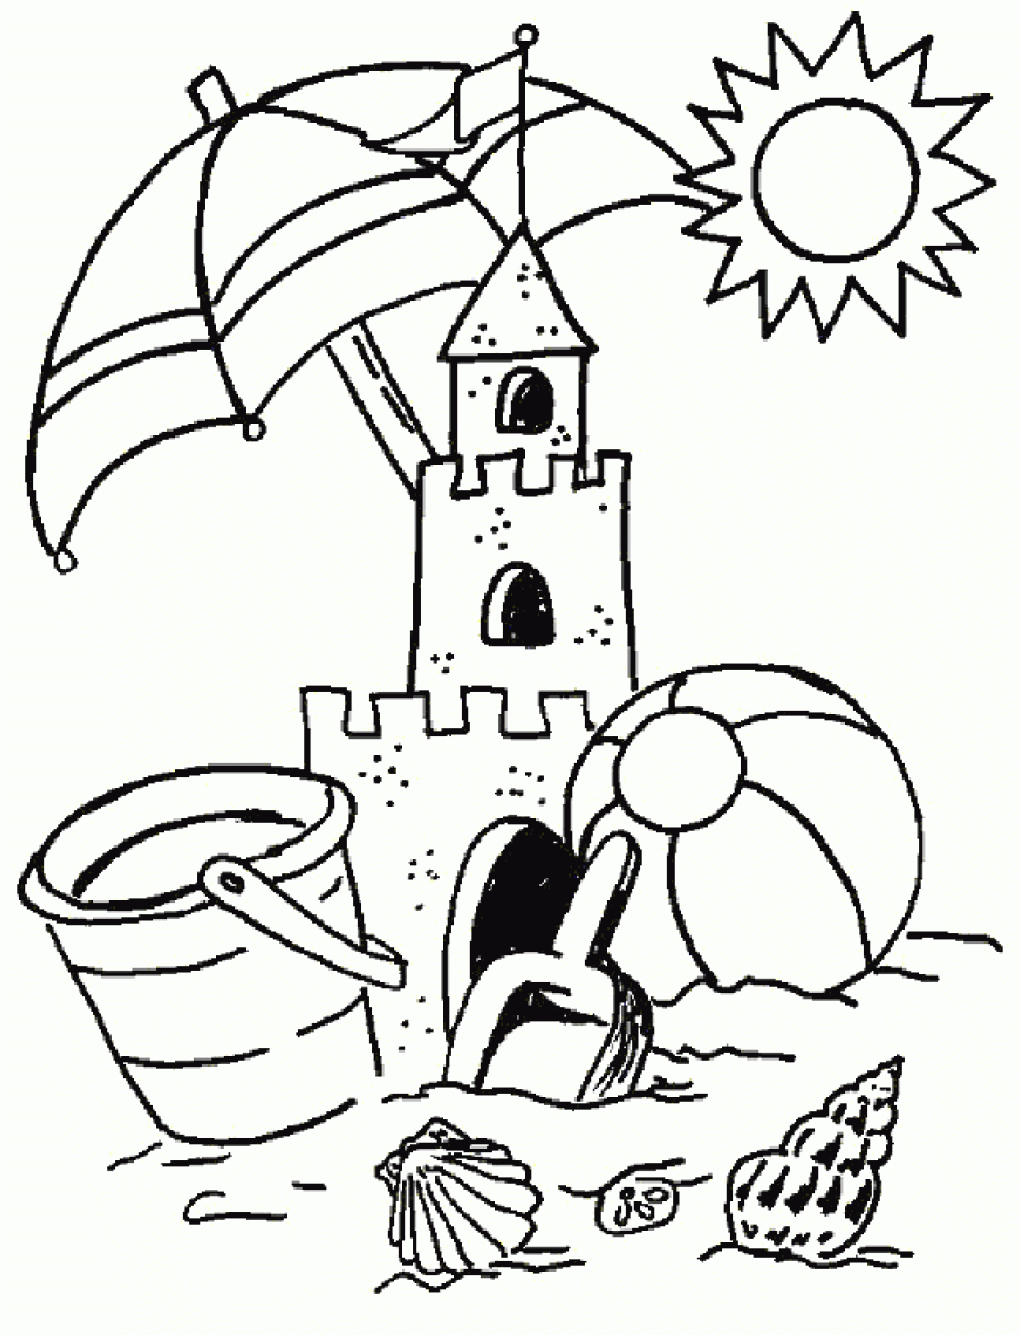 Summer Coloring Pages To Download And Print For Free | S.s Hotel Fun - Free Printable Summer Coloring Pages